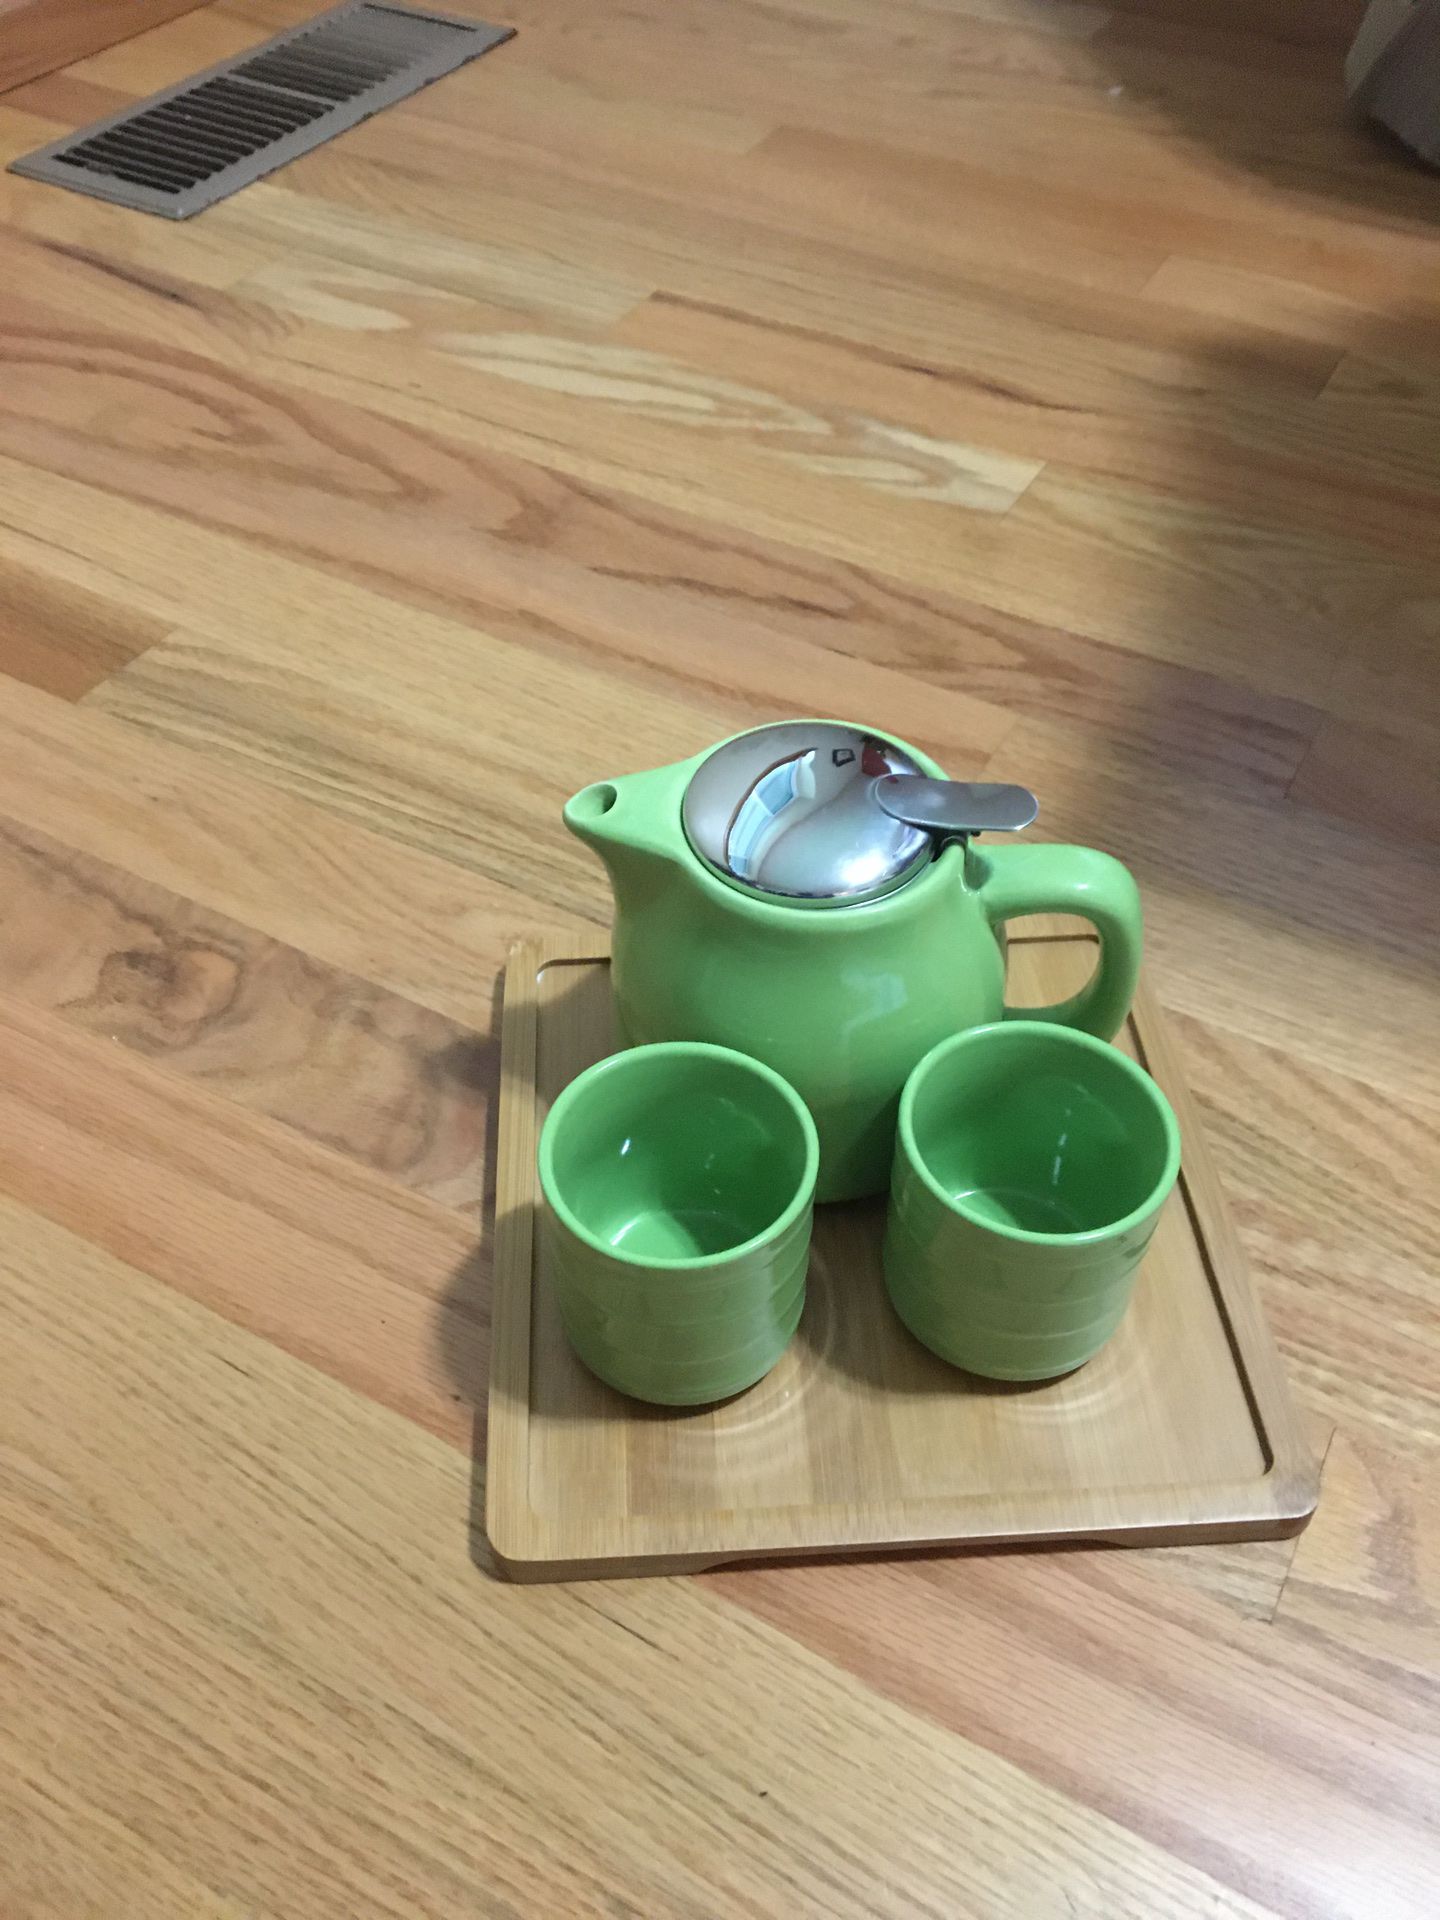 New tea set never used comes with box